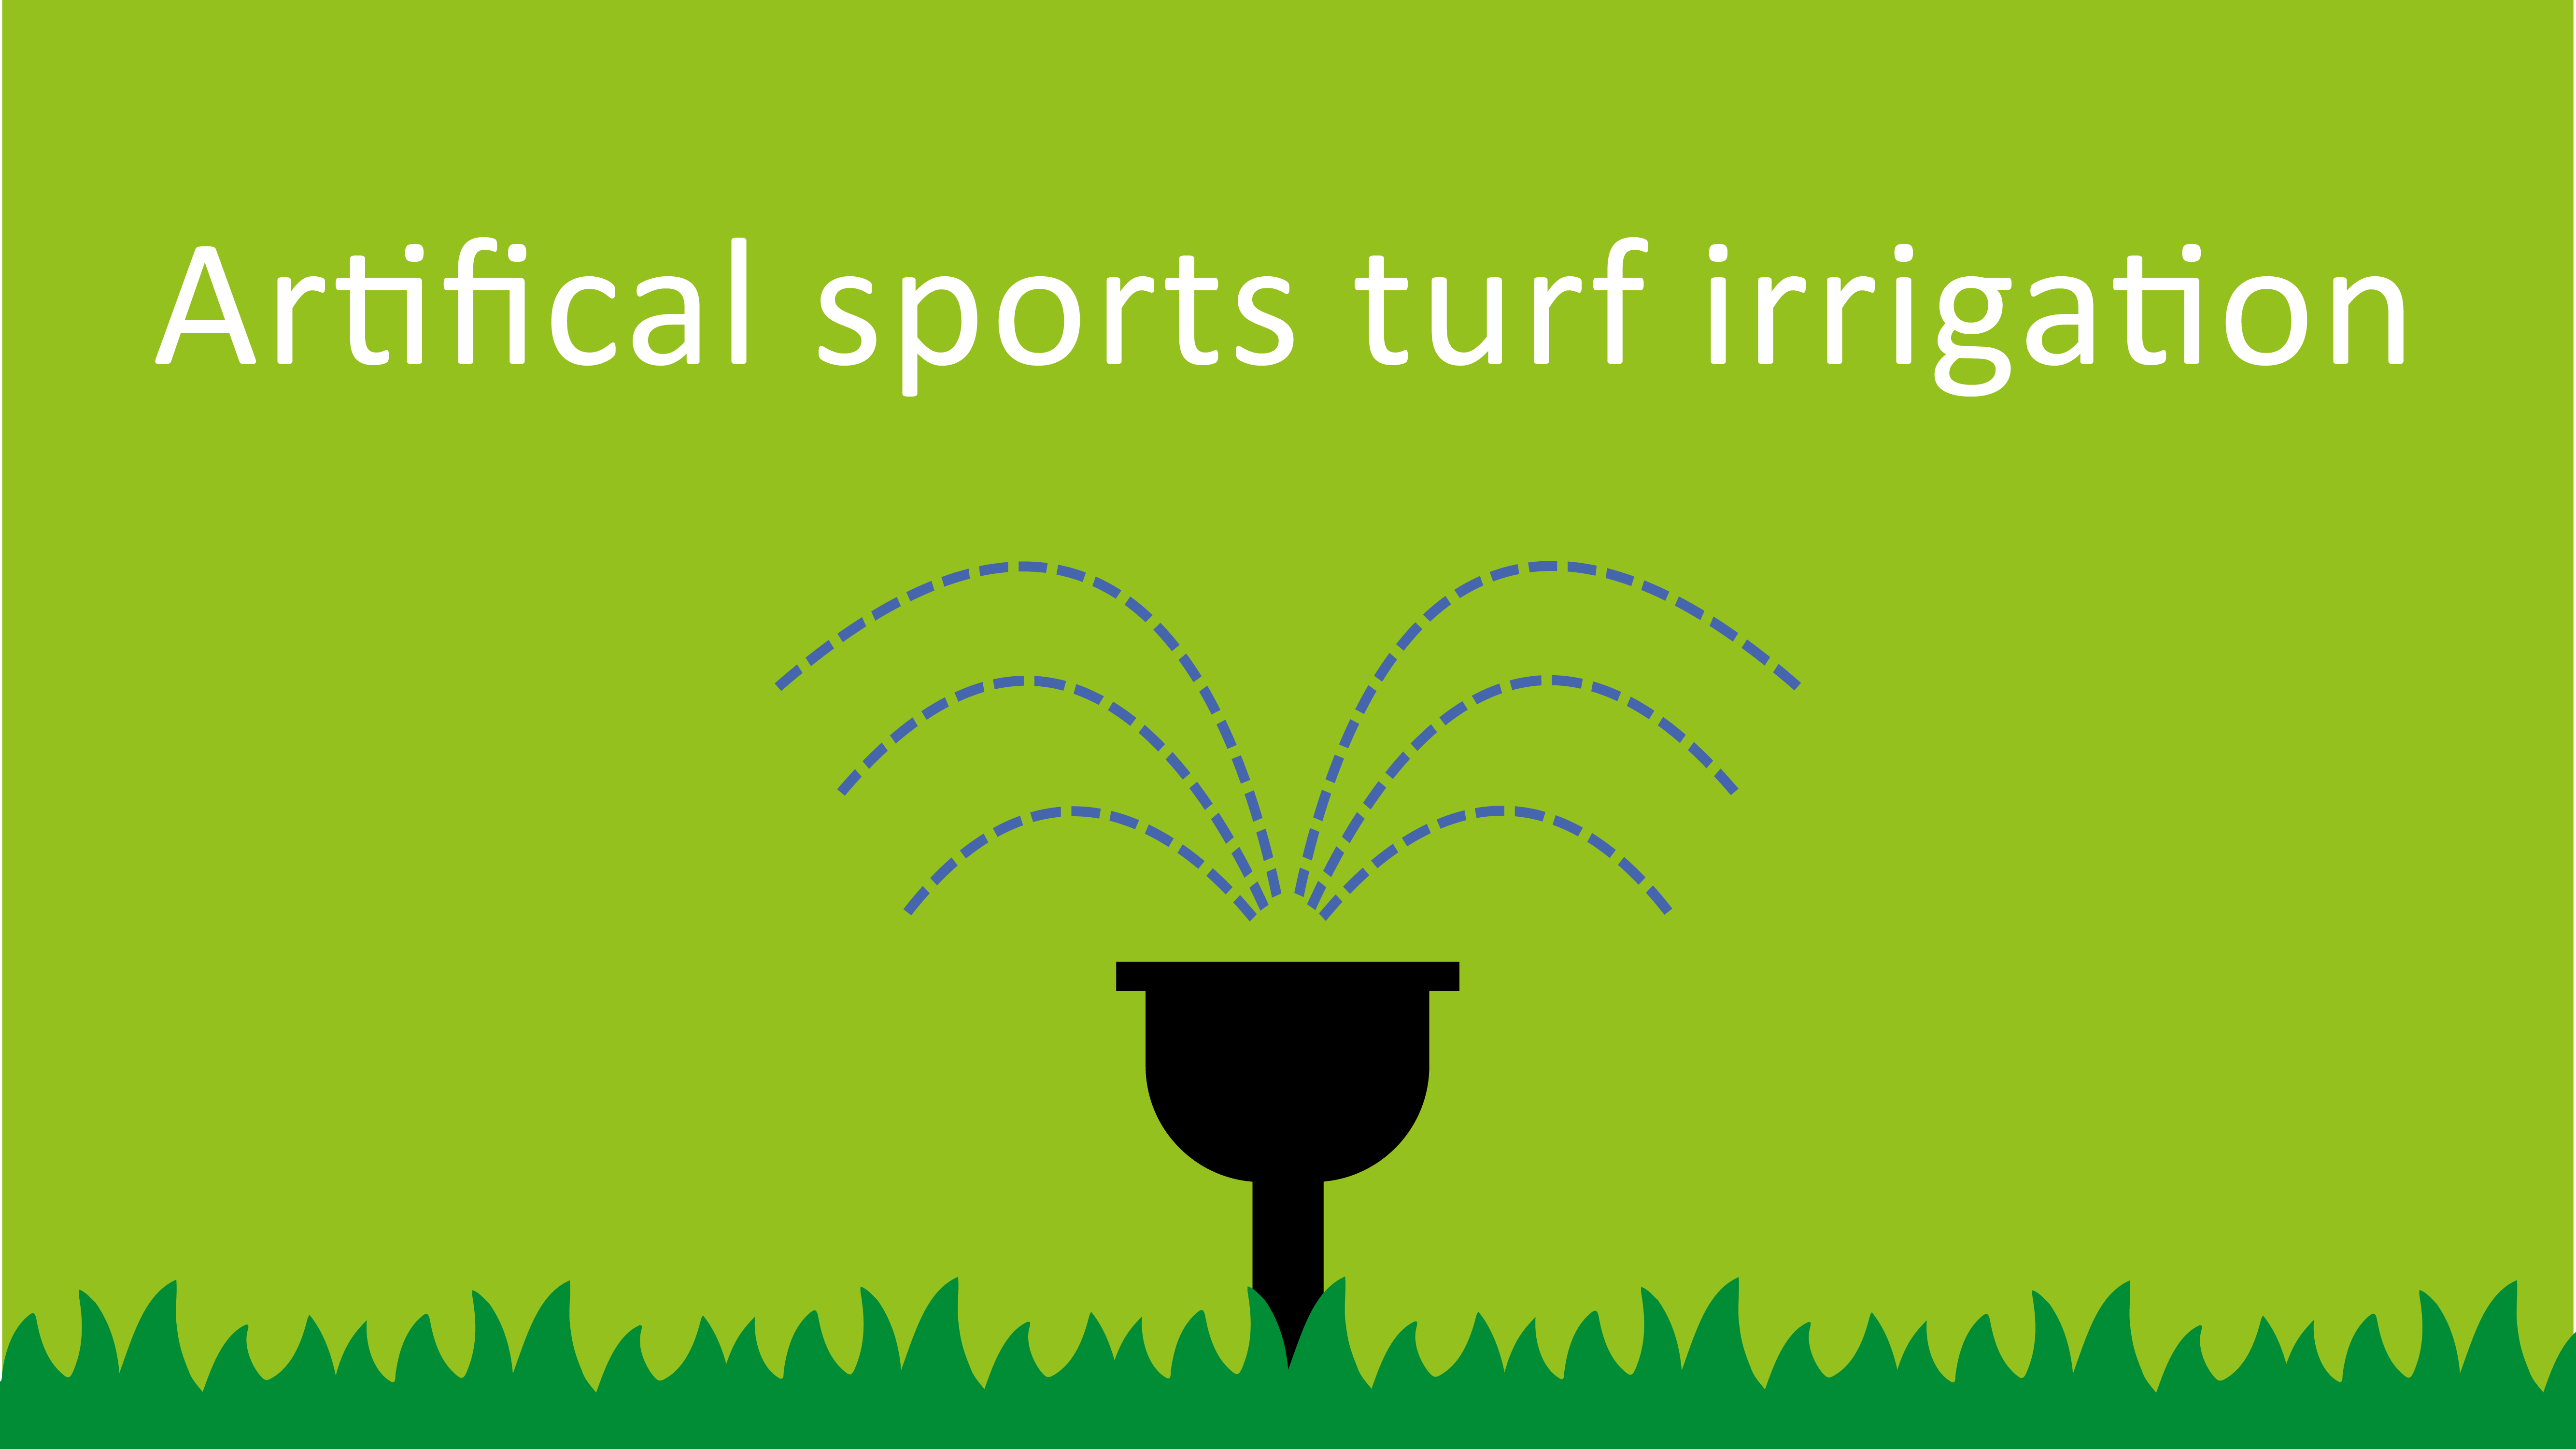 Artifical sports turf irrigation graphic